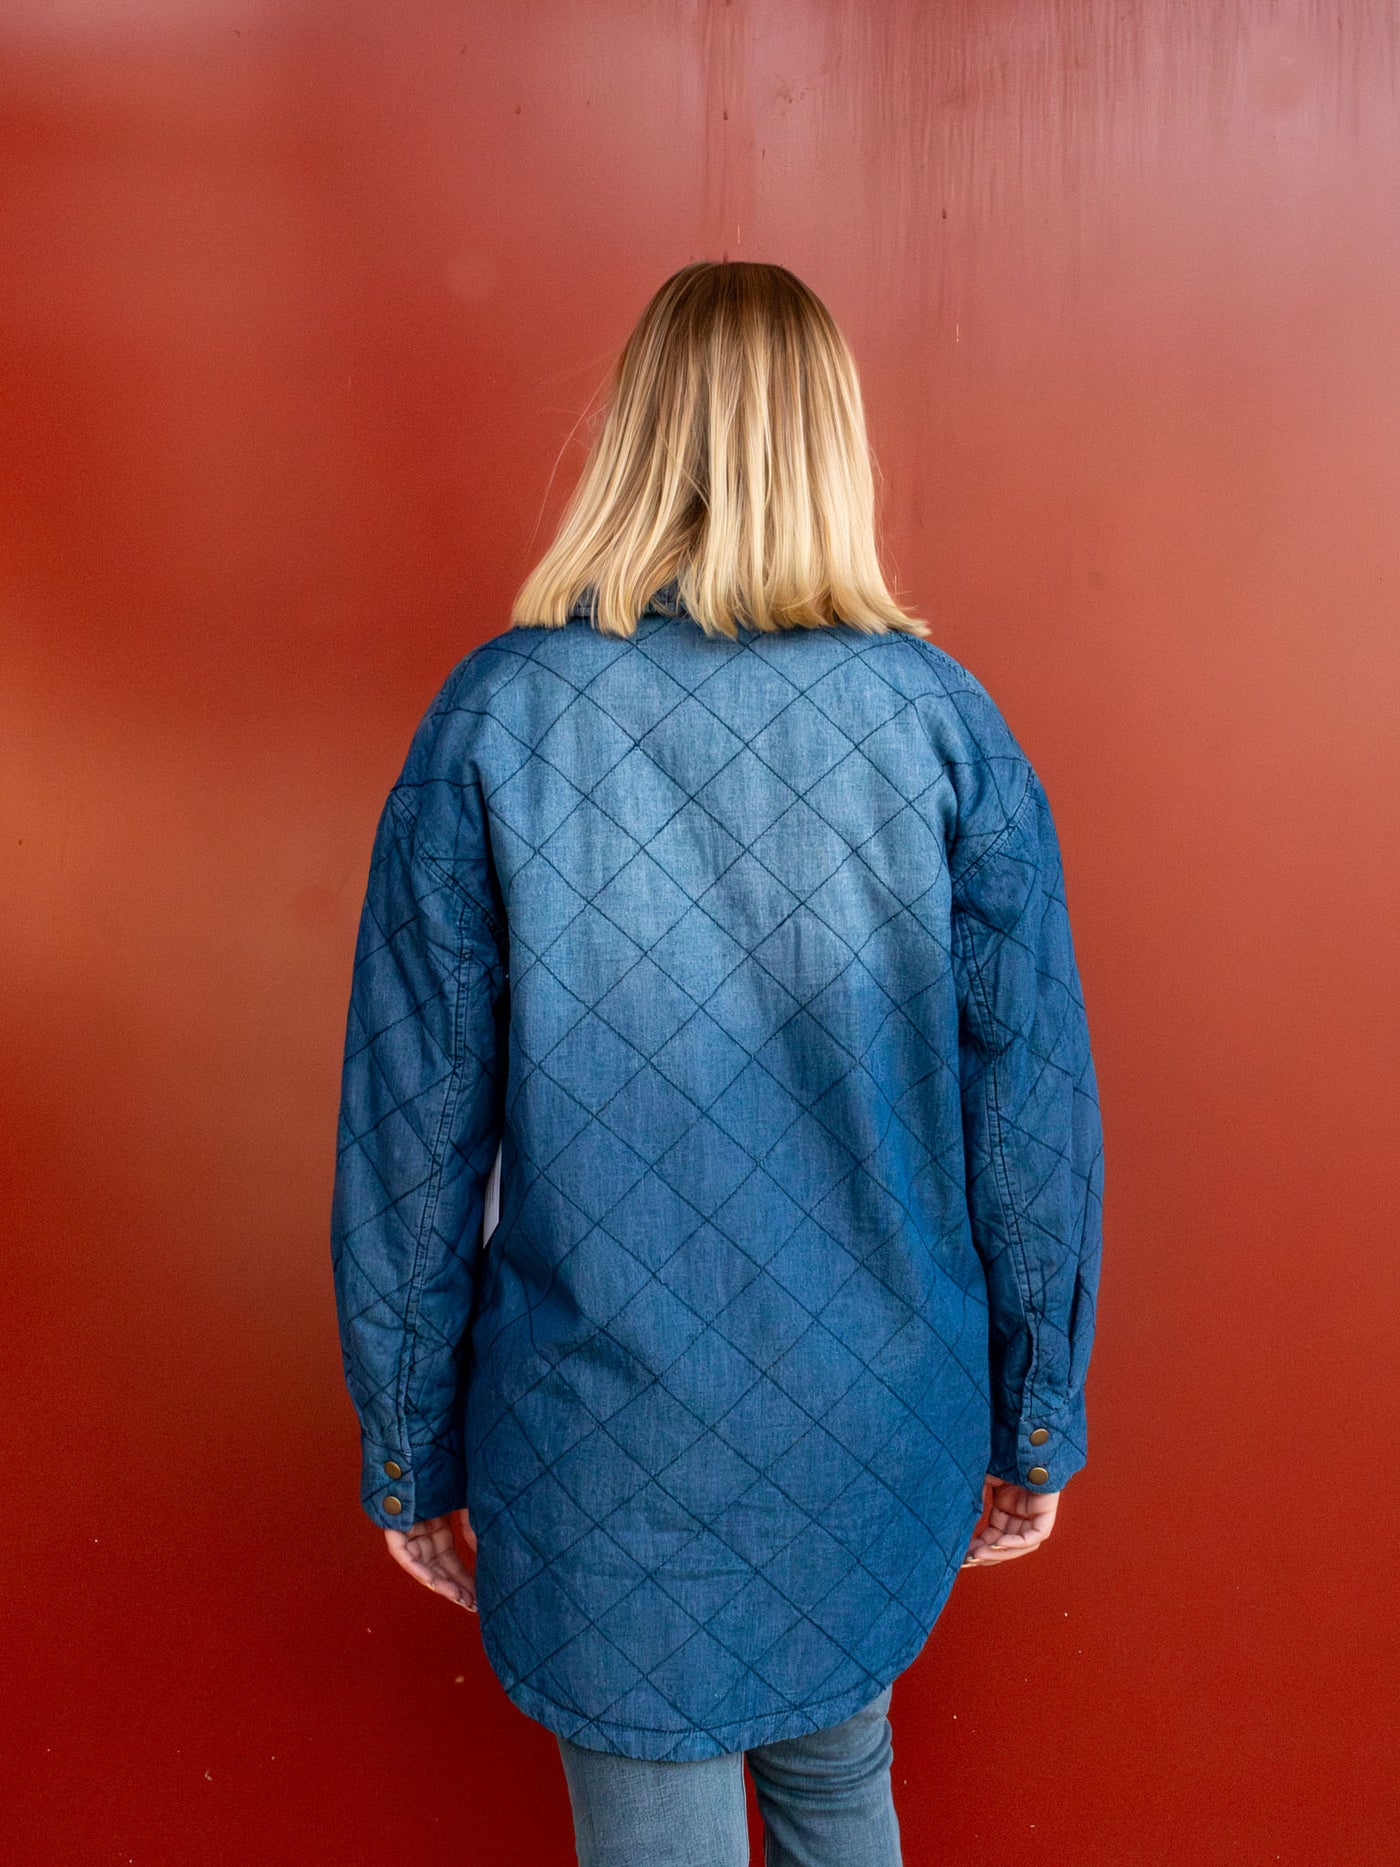 A model wearing a blue quilted shacket that buttons down the front. The model paired it with light wash jeans.